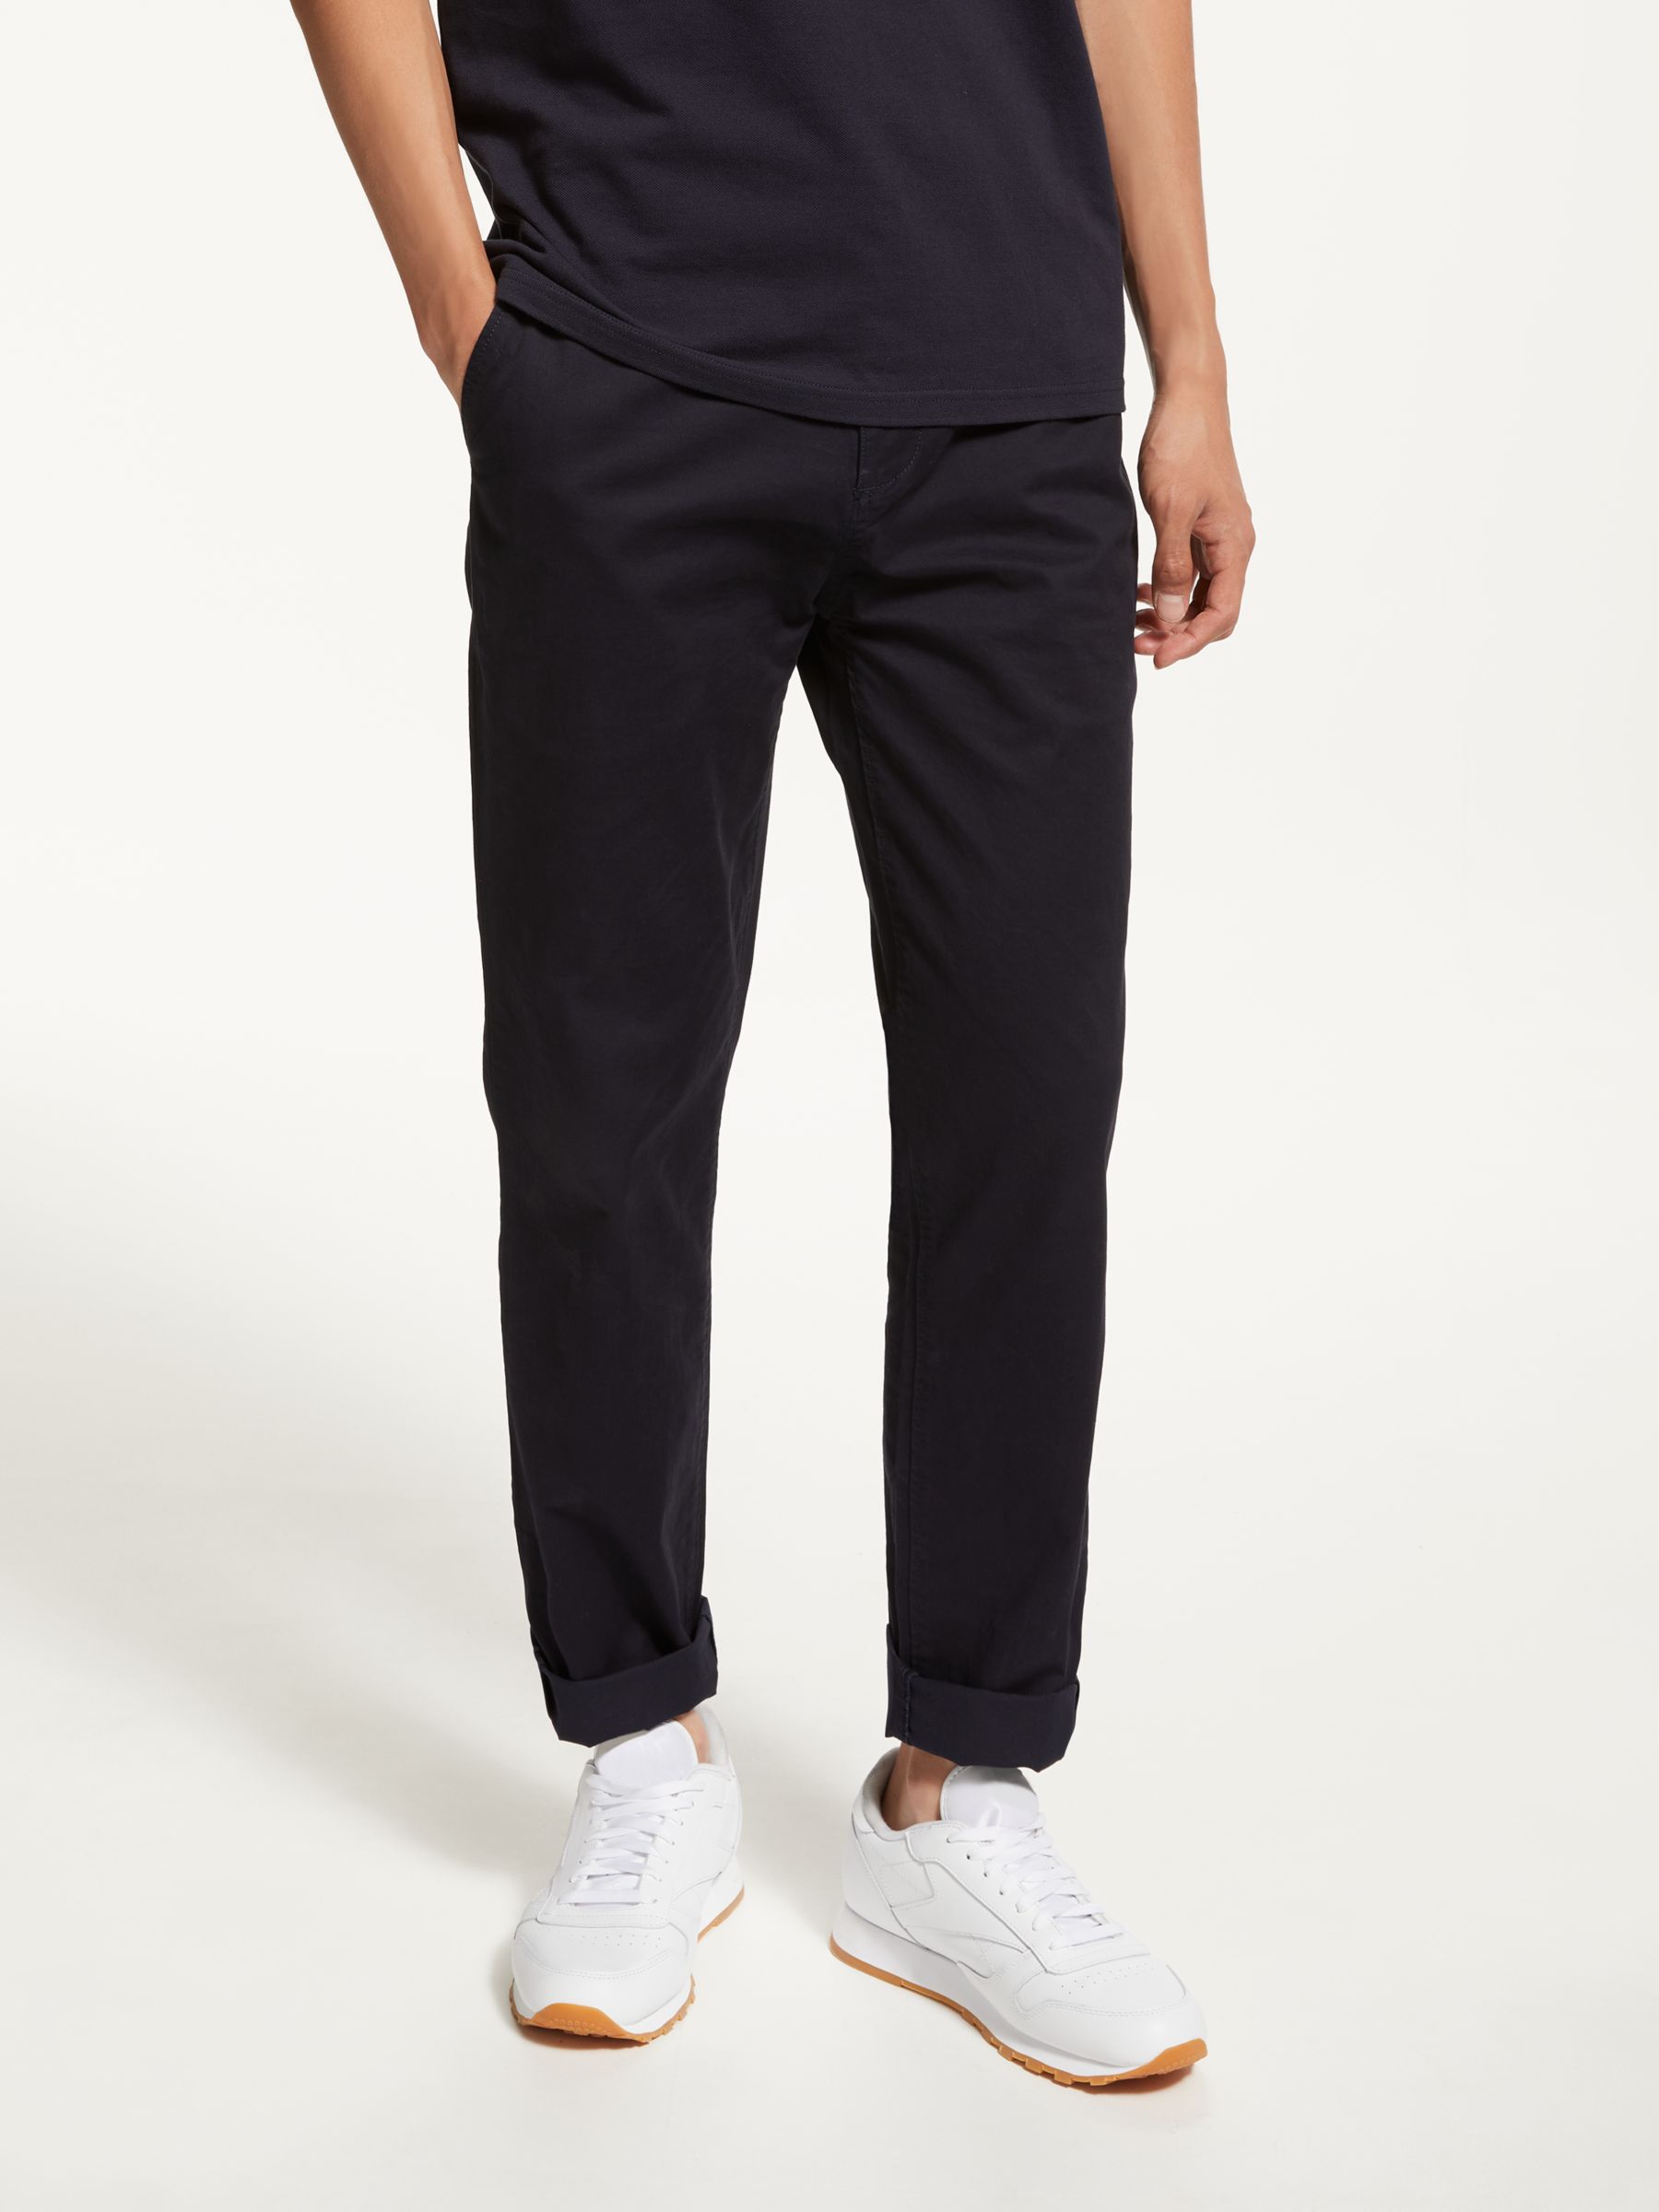 Kin Stretch Cotton Chinos at John Lewis & Partners